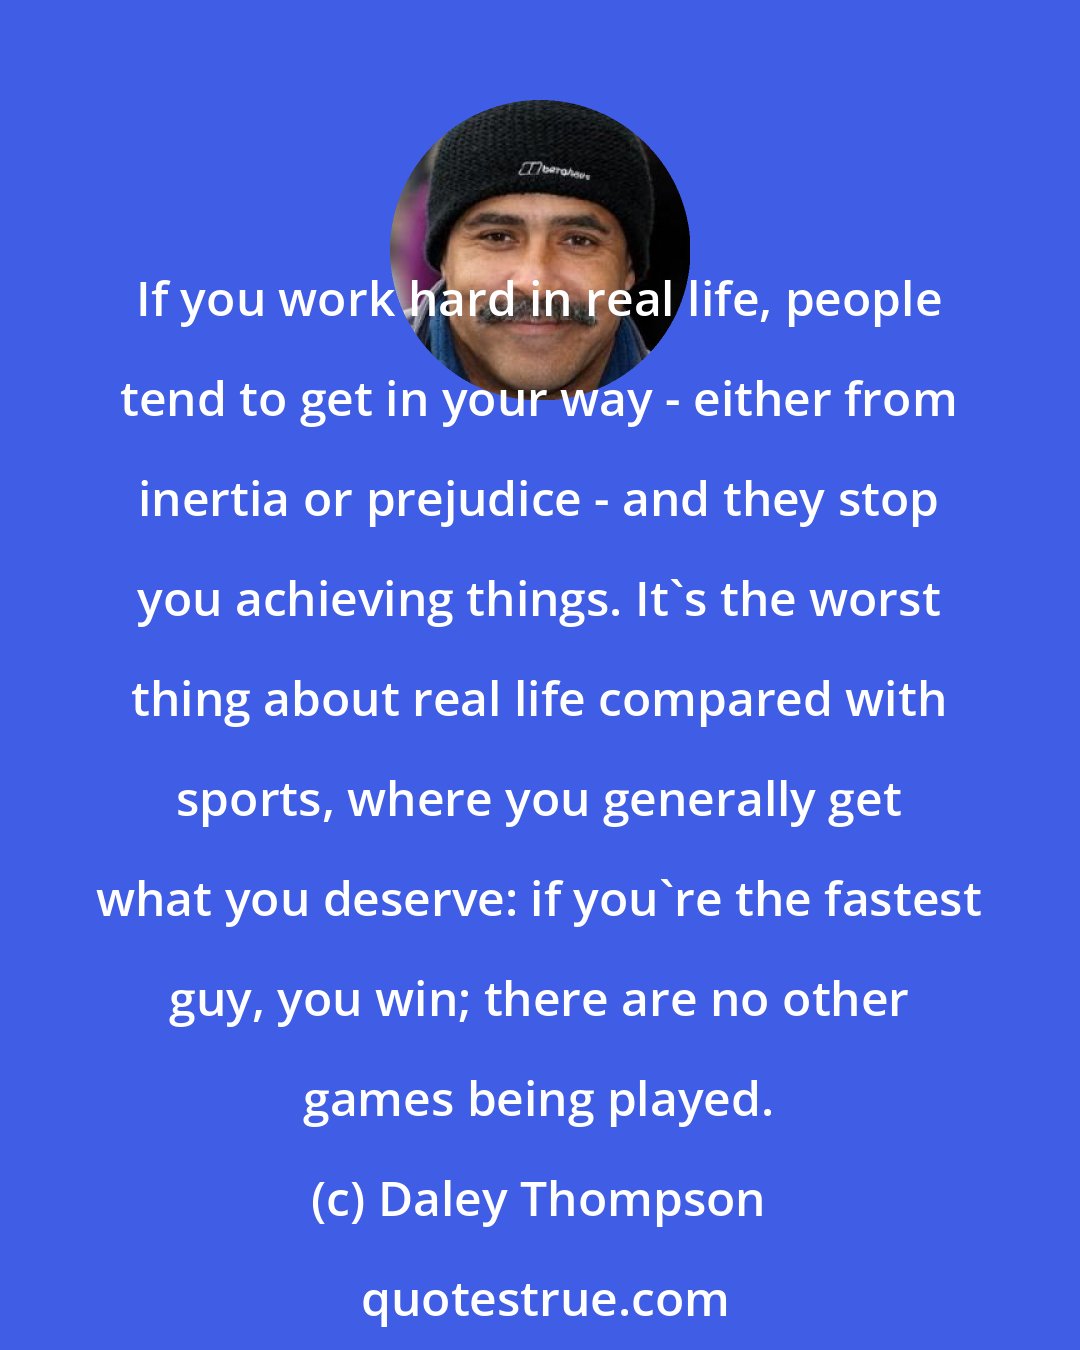 Daley Thompson: If you work hard in real life, people tend to get in your way - either from inertia or prejudice - and they stop you achieving things. It's the worst thing about real life compared with sports, where you generally get what you deserve: if you're the fastest guy, you win; there are no other games being played.